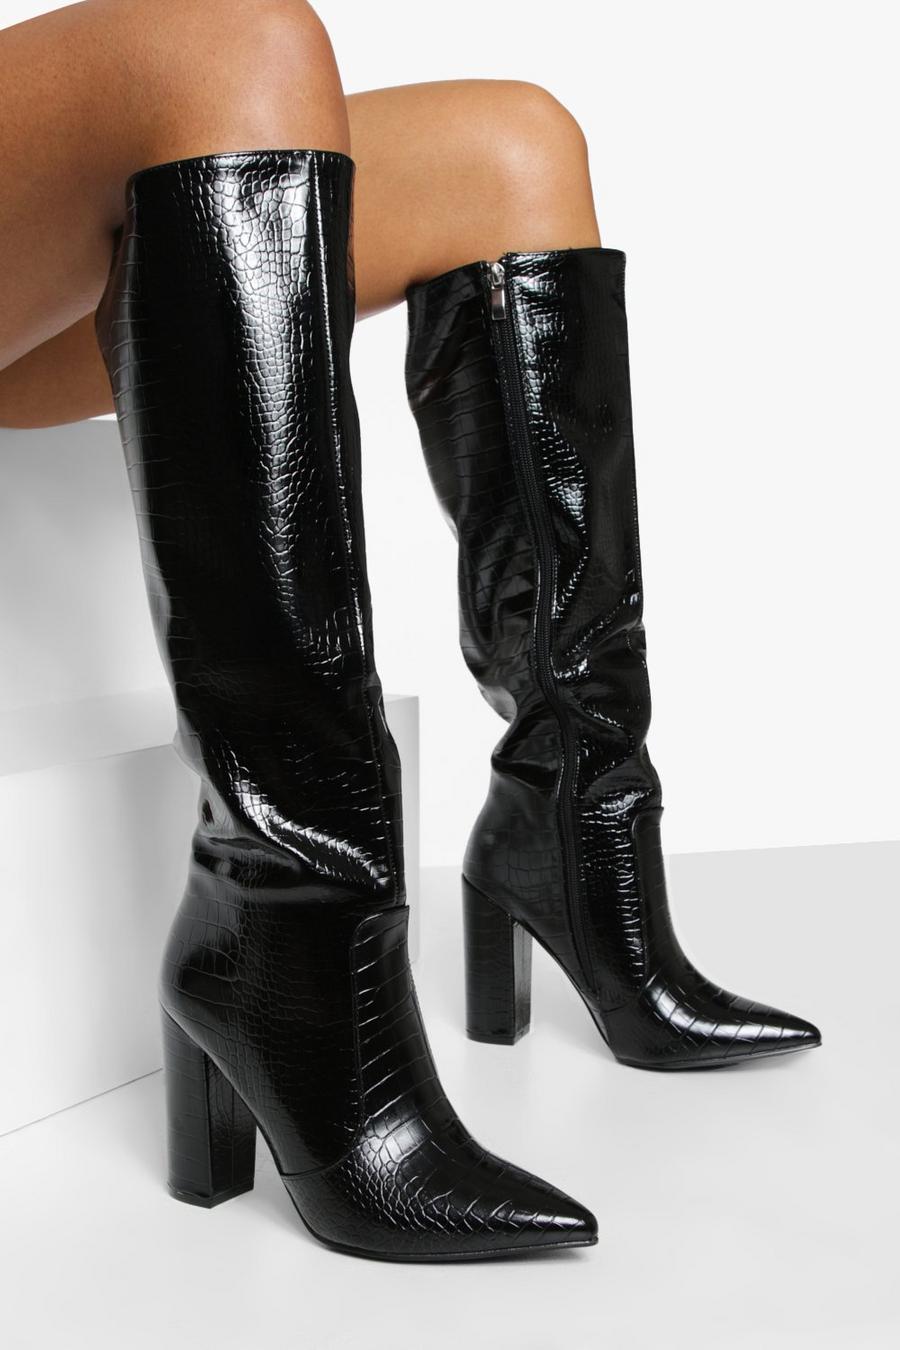 Black Pointed Toe Croc Knee High Boots image number 1